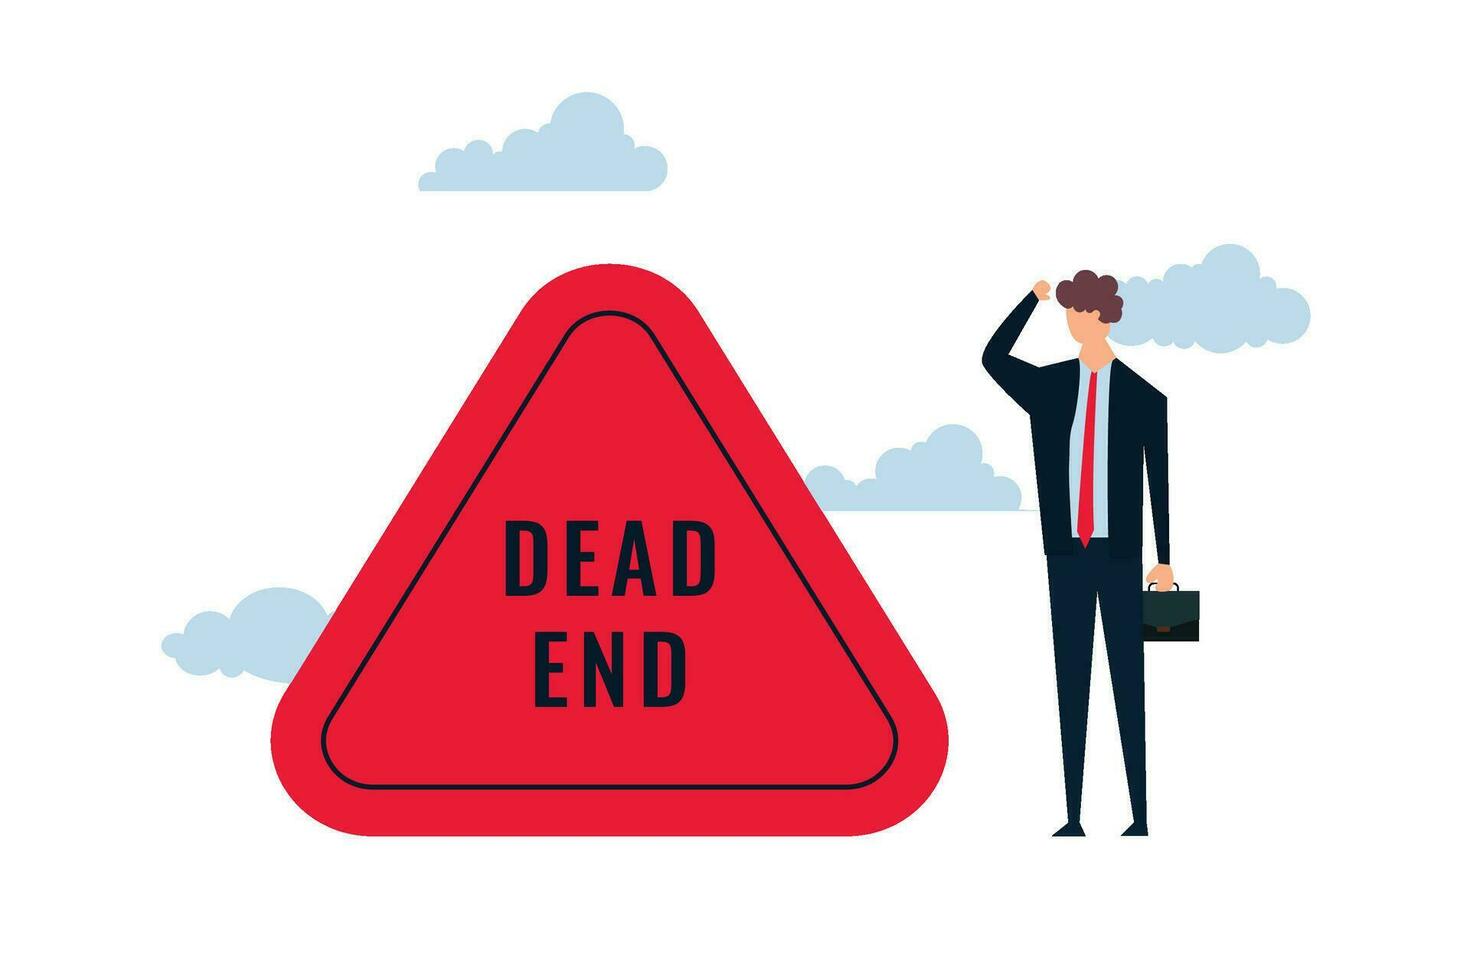 Business or career dead end. despondent office worker and businessman pause at a dead-end road sign vector